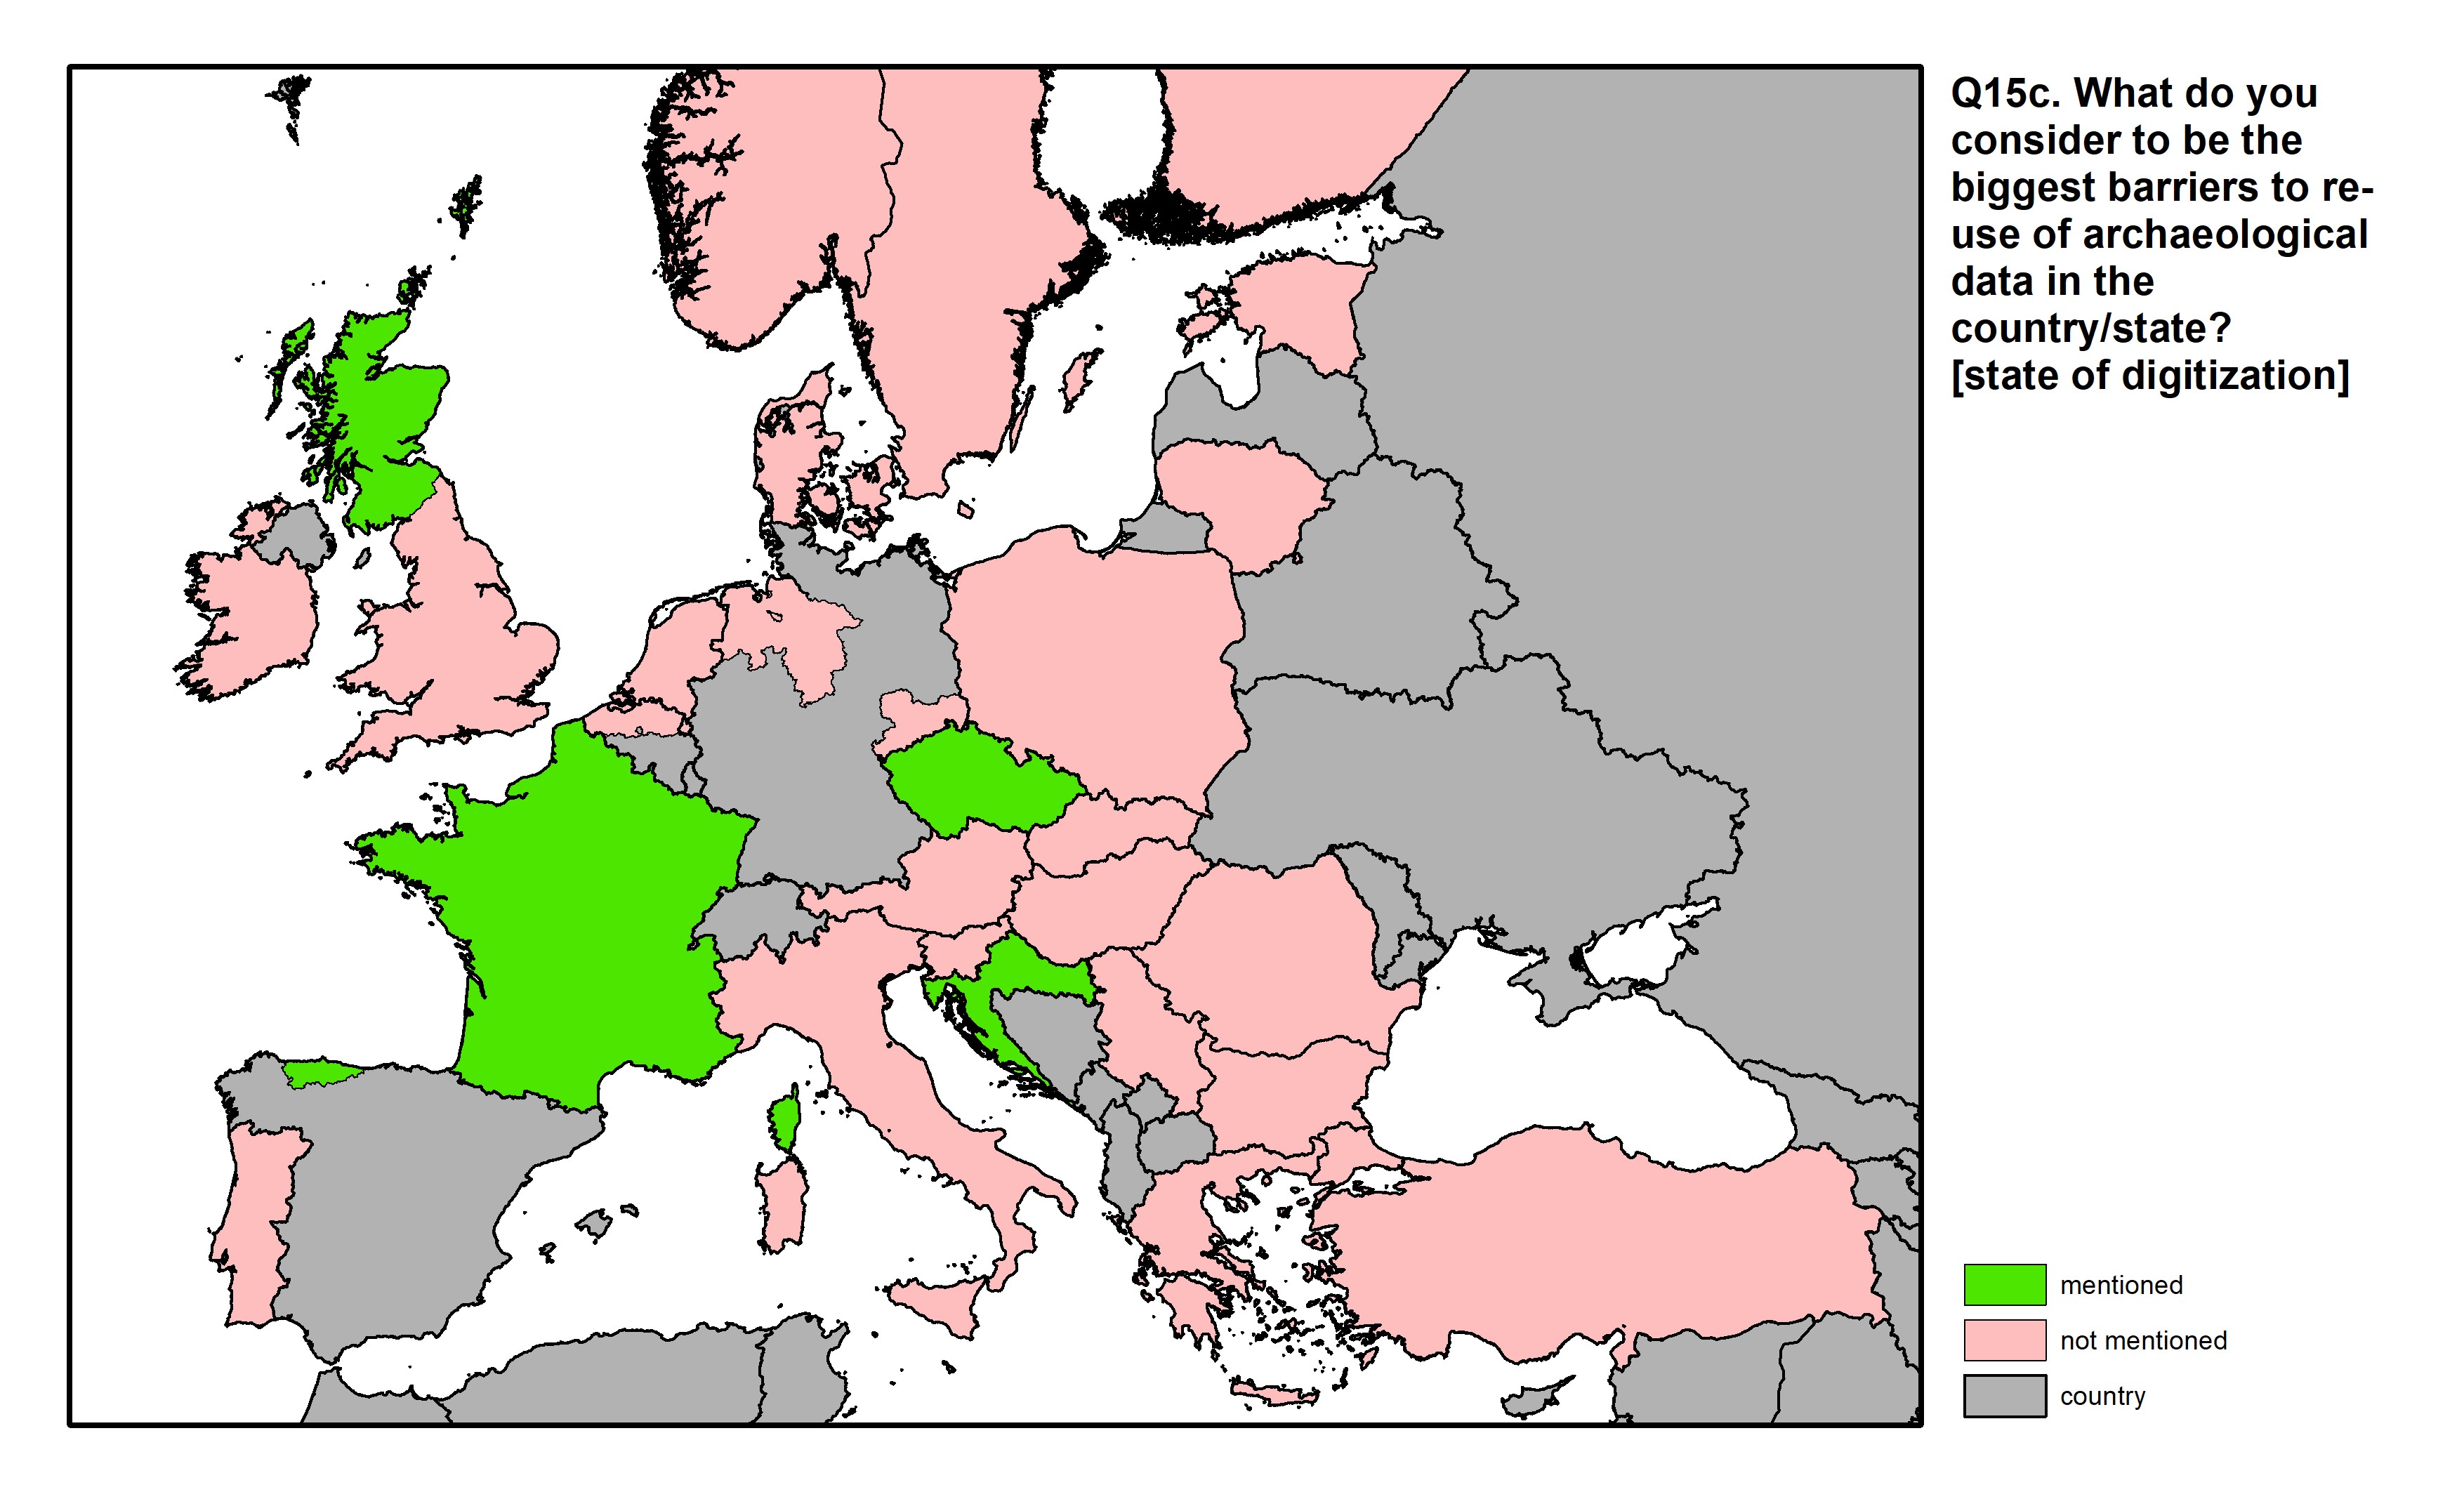 Figure 51: a map of Europe showing countries and regions in colour based on response rates to the survey question.